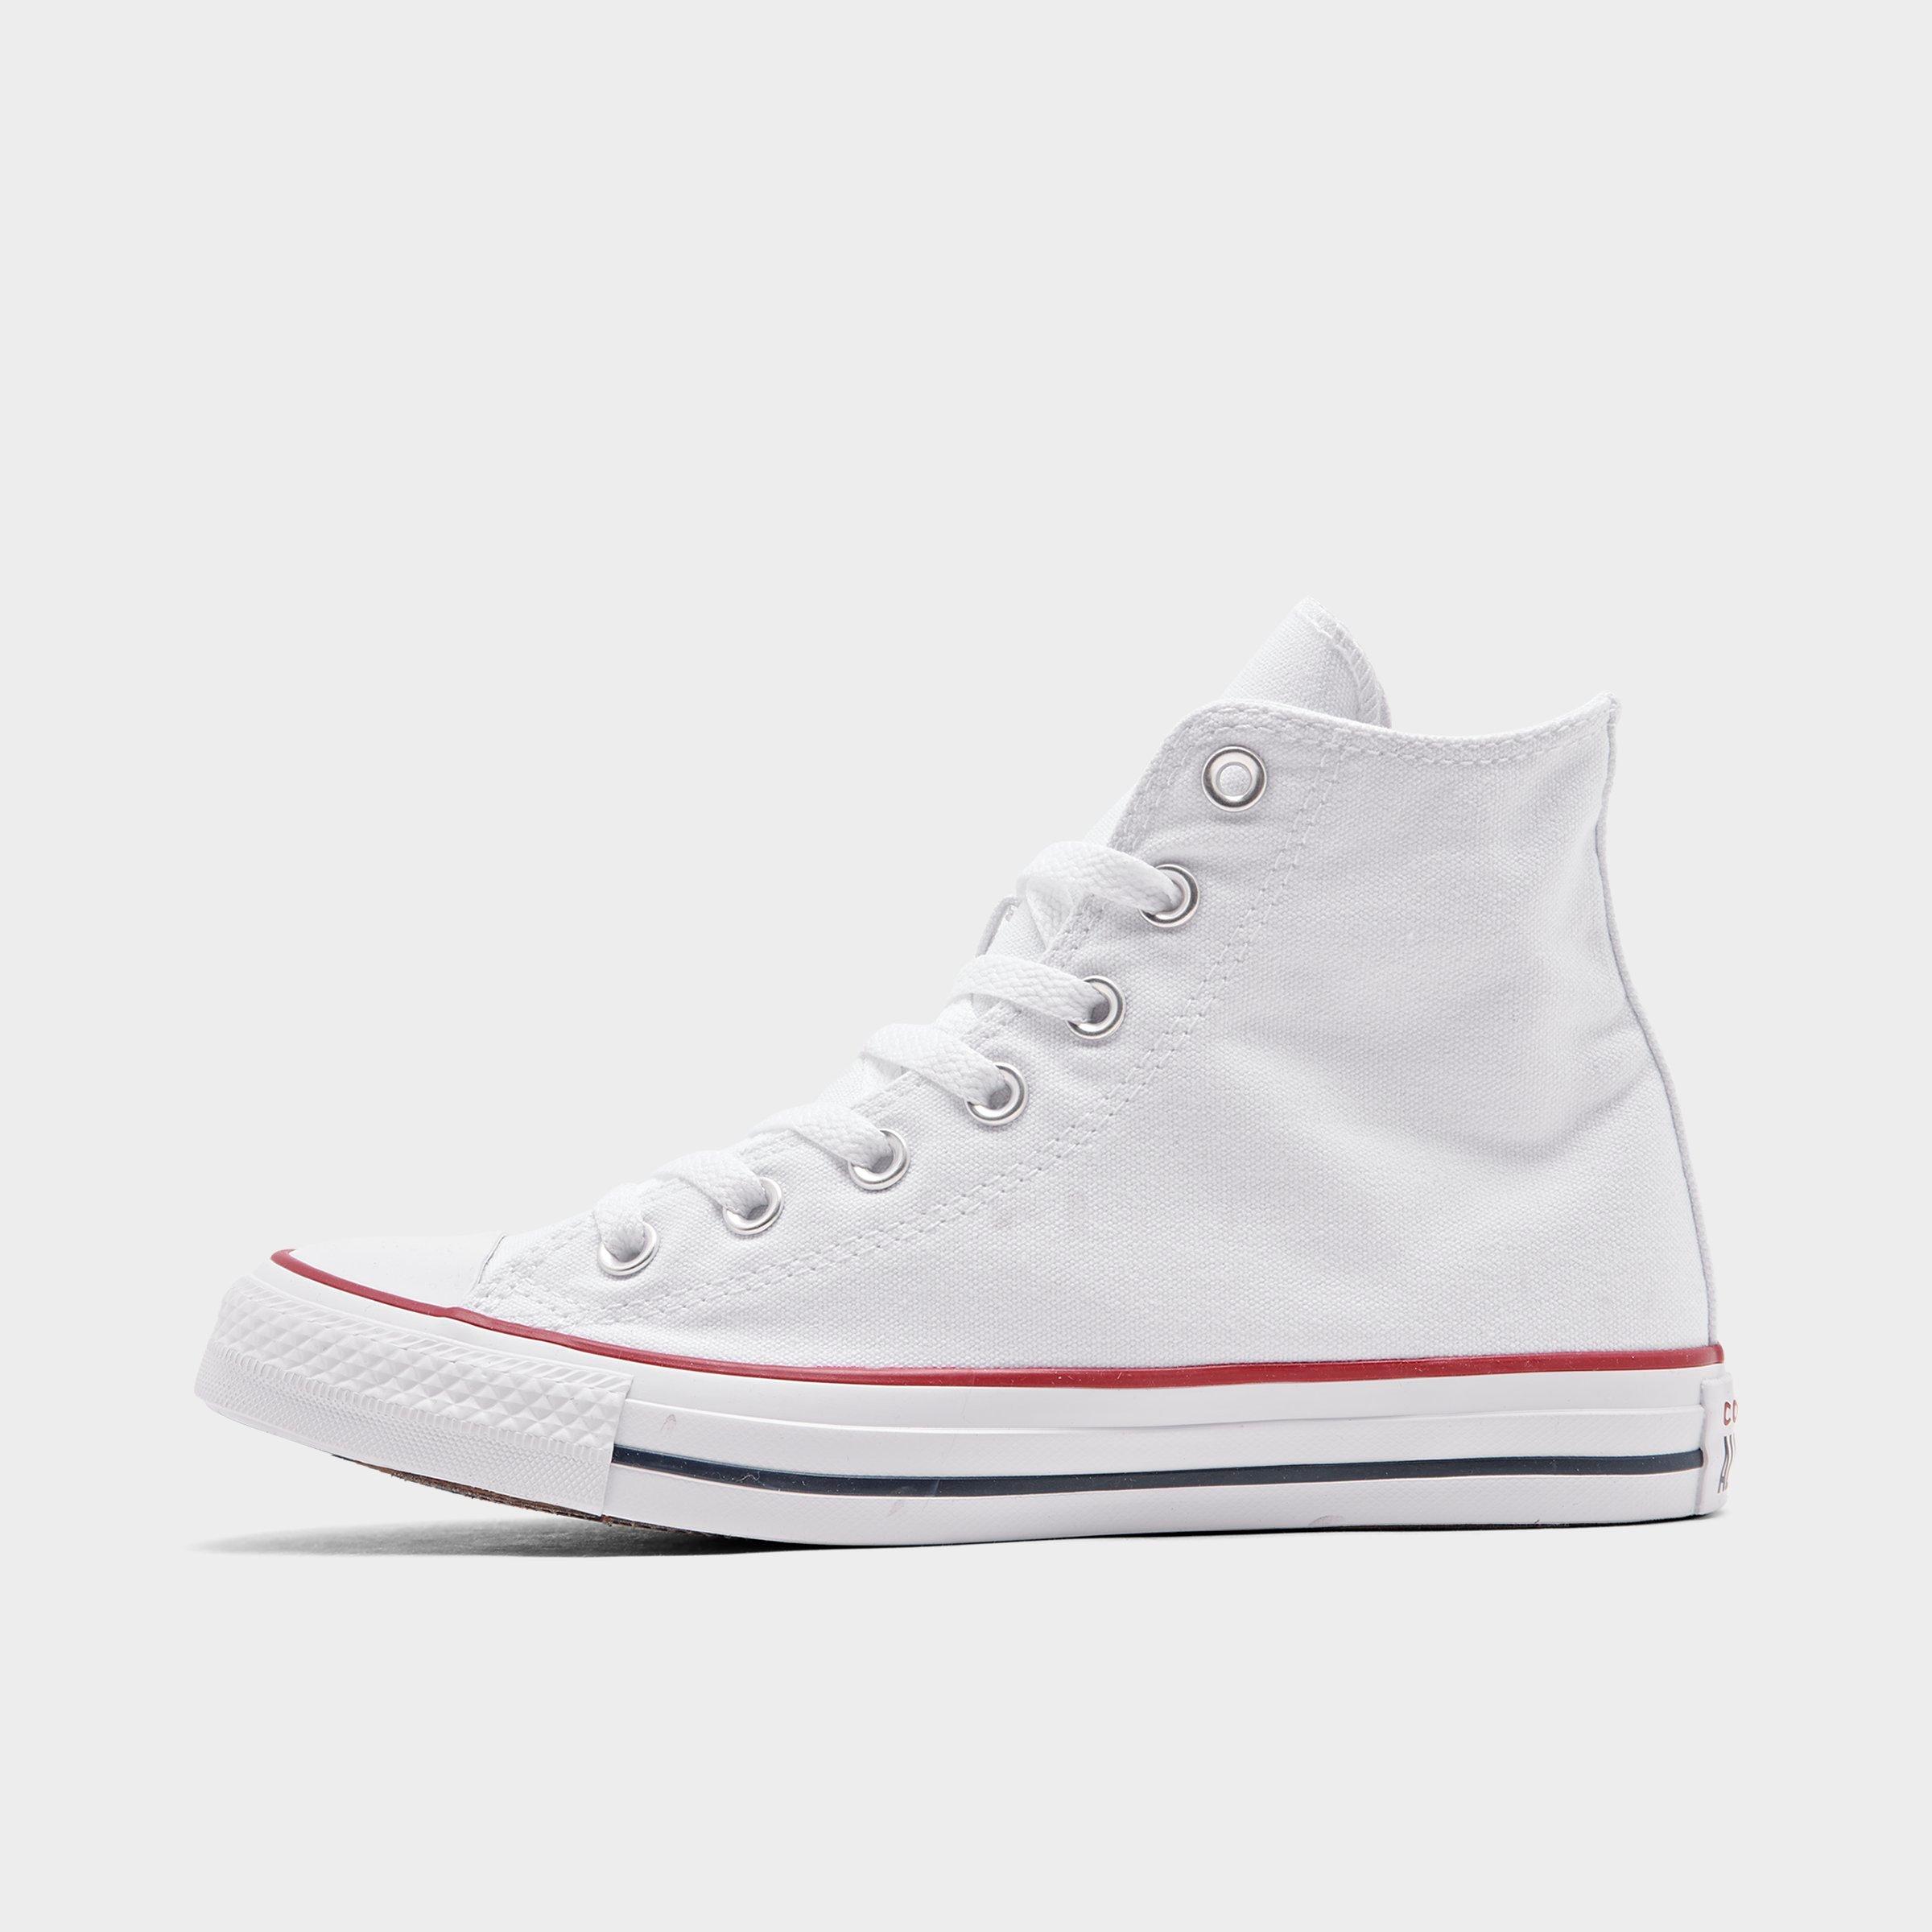 UPC 022867416602 product image for Converse Women's Chuck Taylor All Star High Top Casual Shoes (Big Kids' Sizes Av | upcitemdb.com